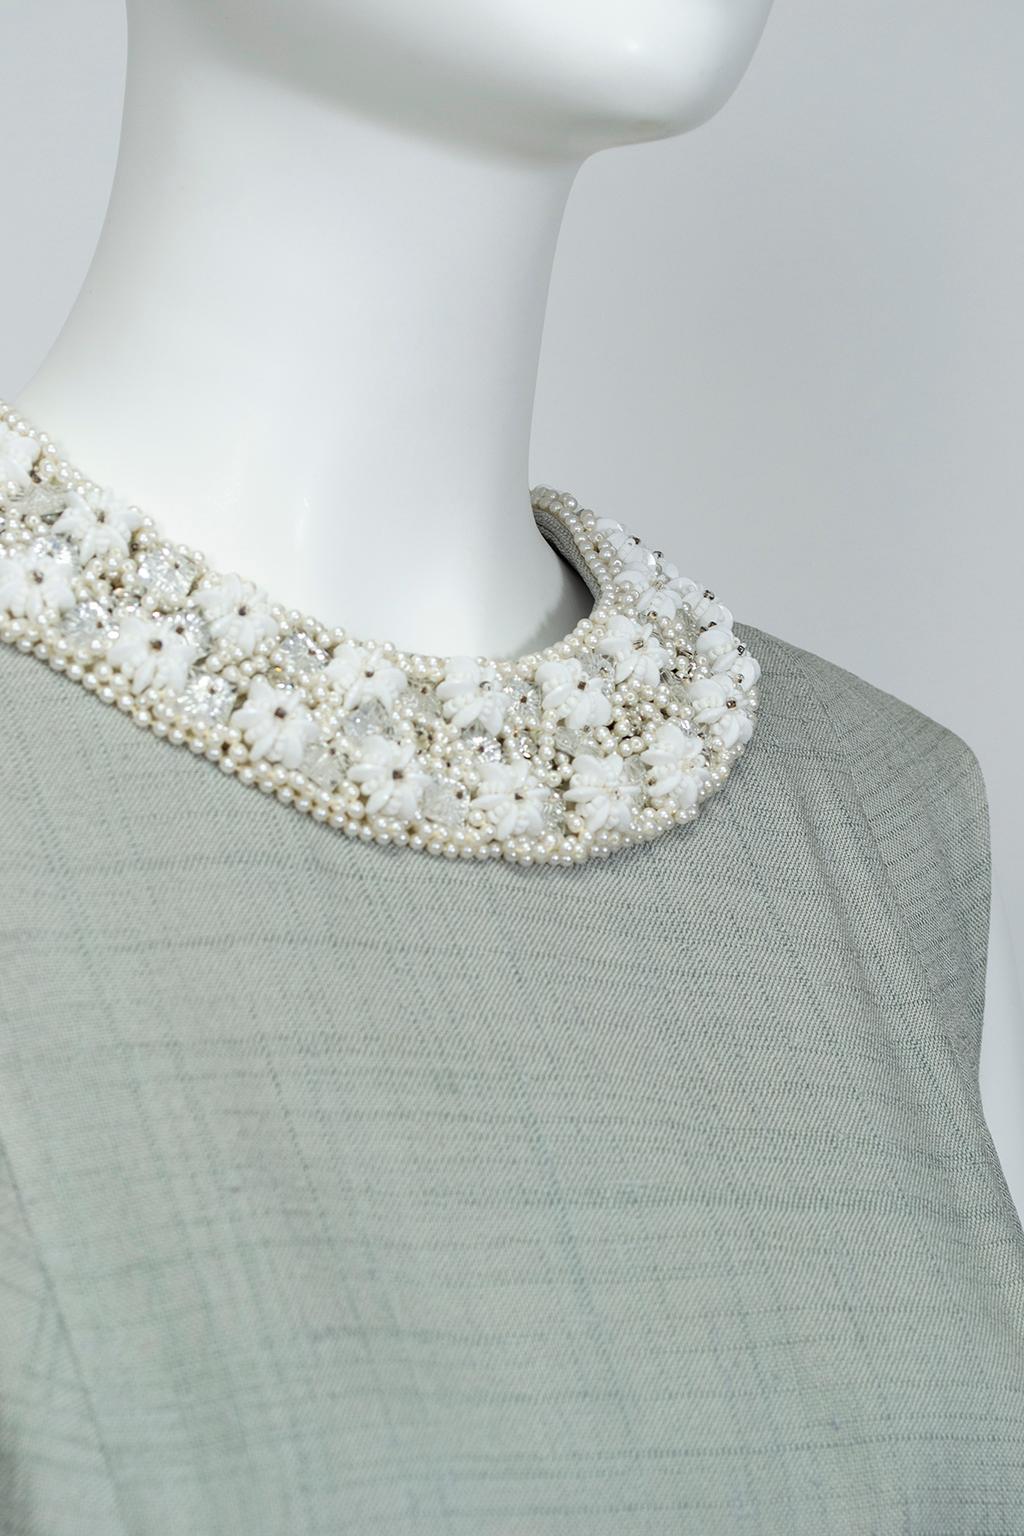 Dove Gray A-Line Shift Dress with Bead-Crusted Neckline and Pockets - M, 1960s For Sale 2